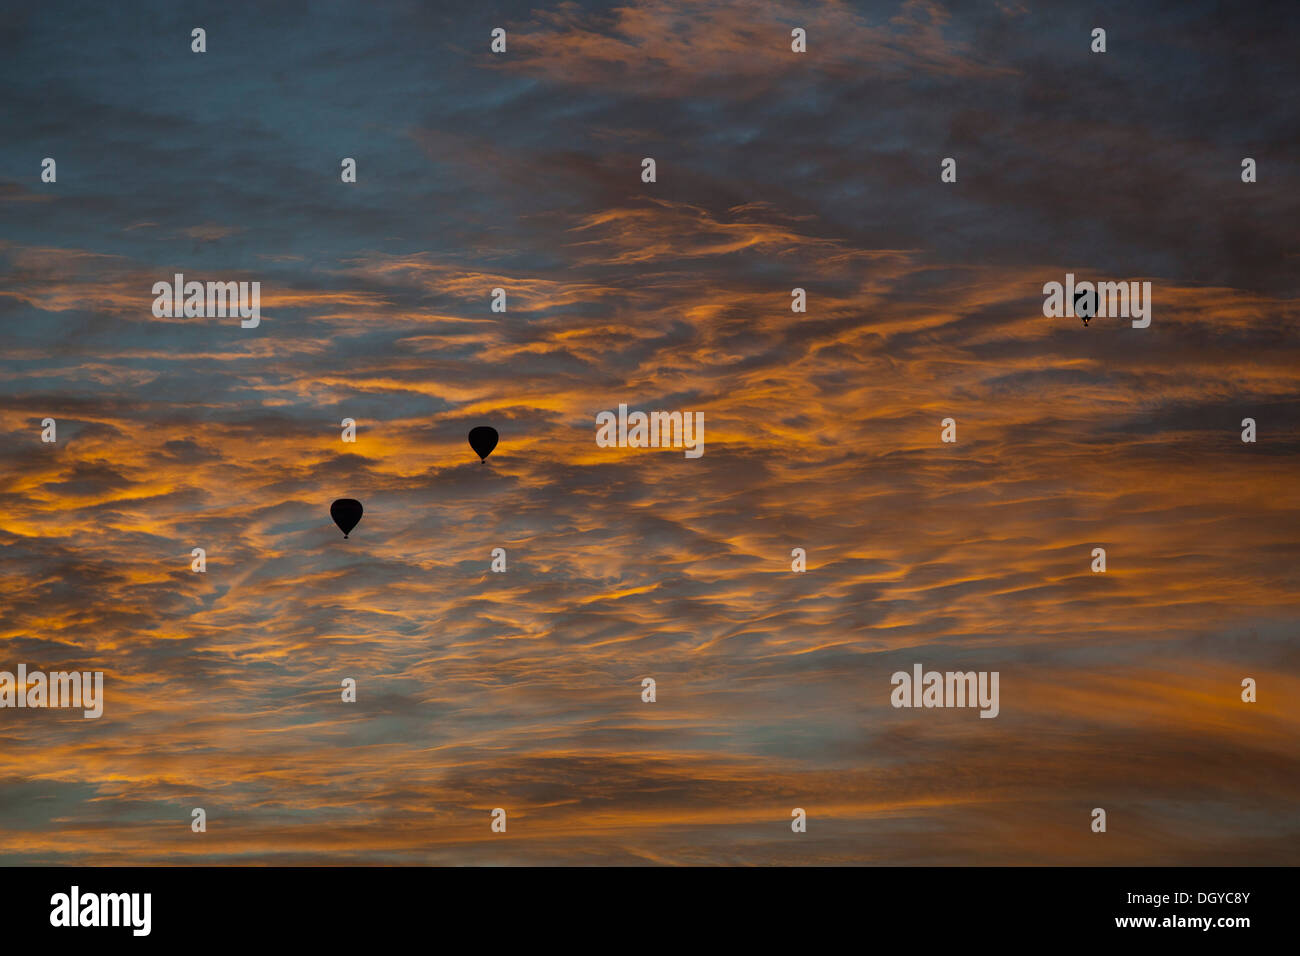 Three silhouetted hot air balloons against a dusk sky in Melbourne, Victoria, Australia Stock Photo